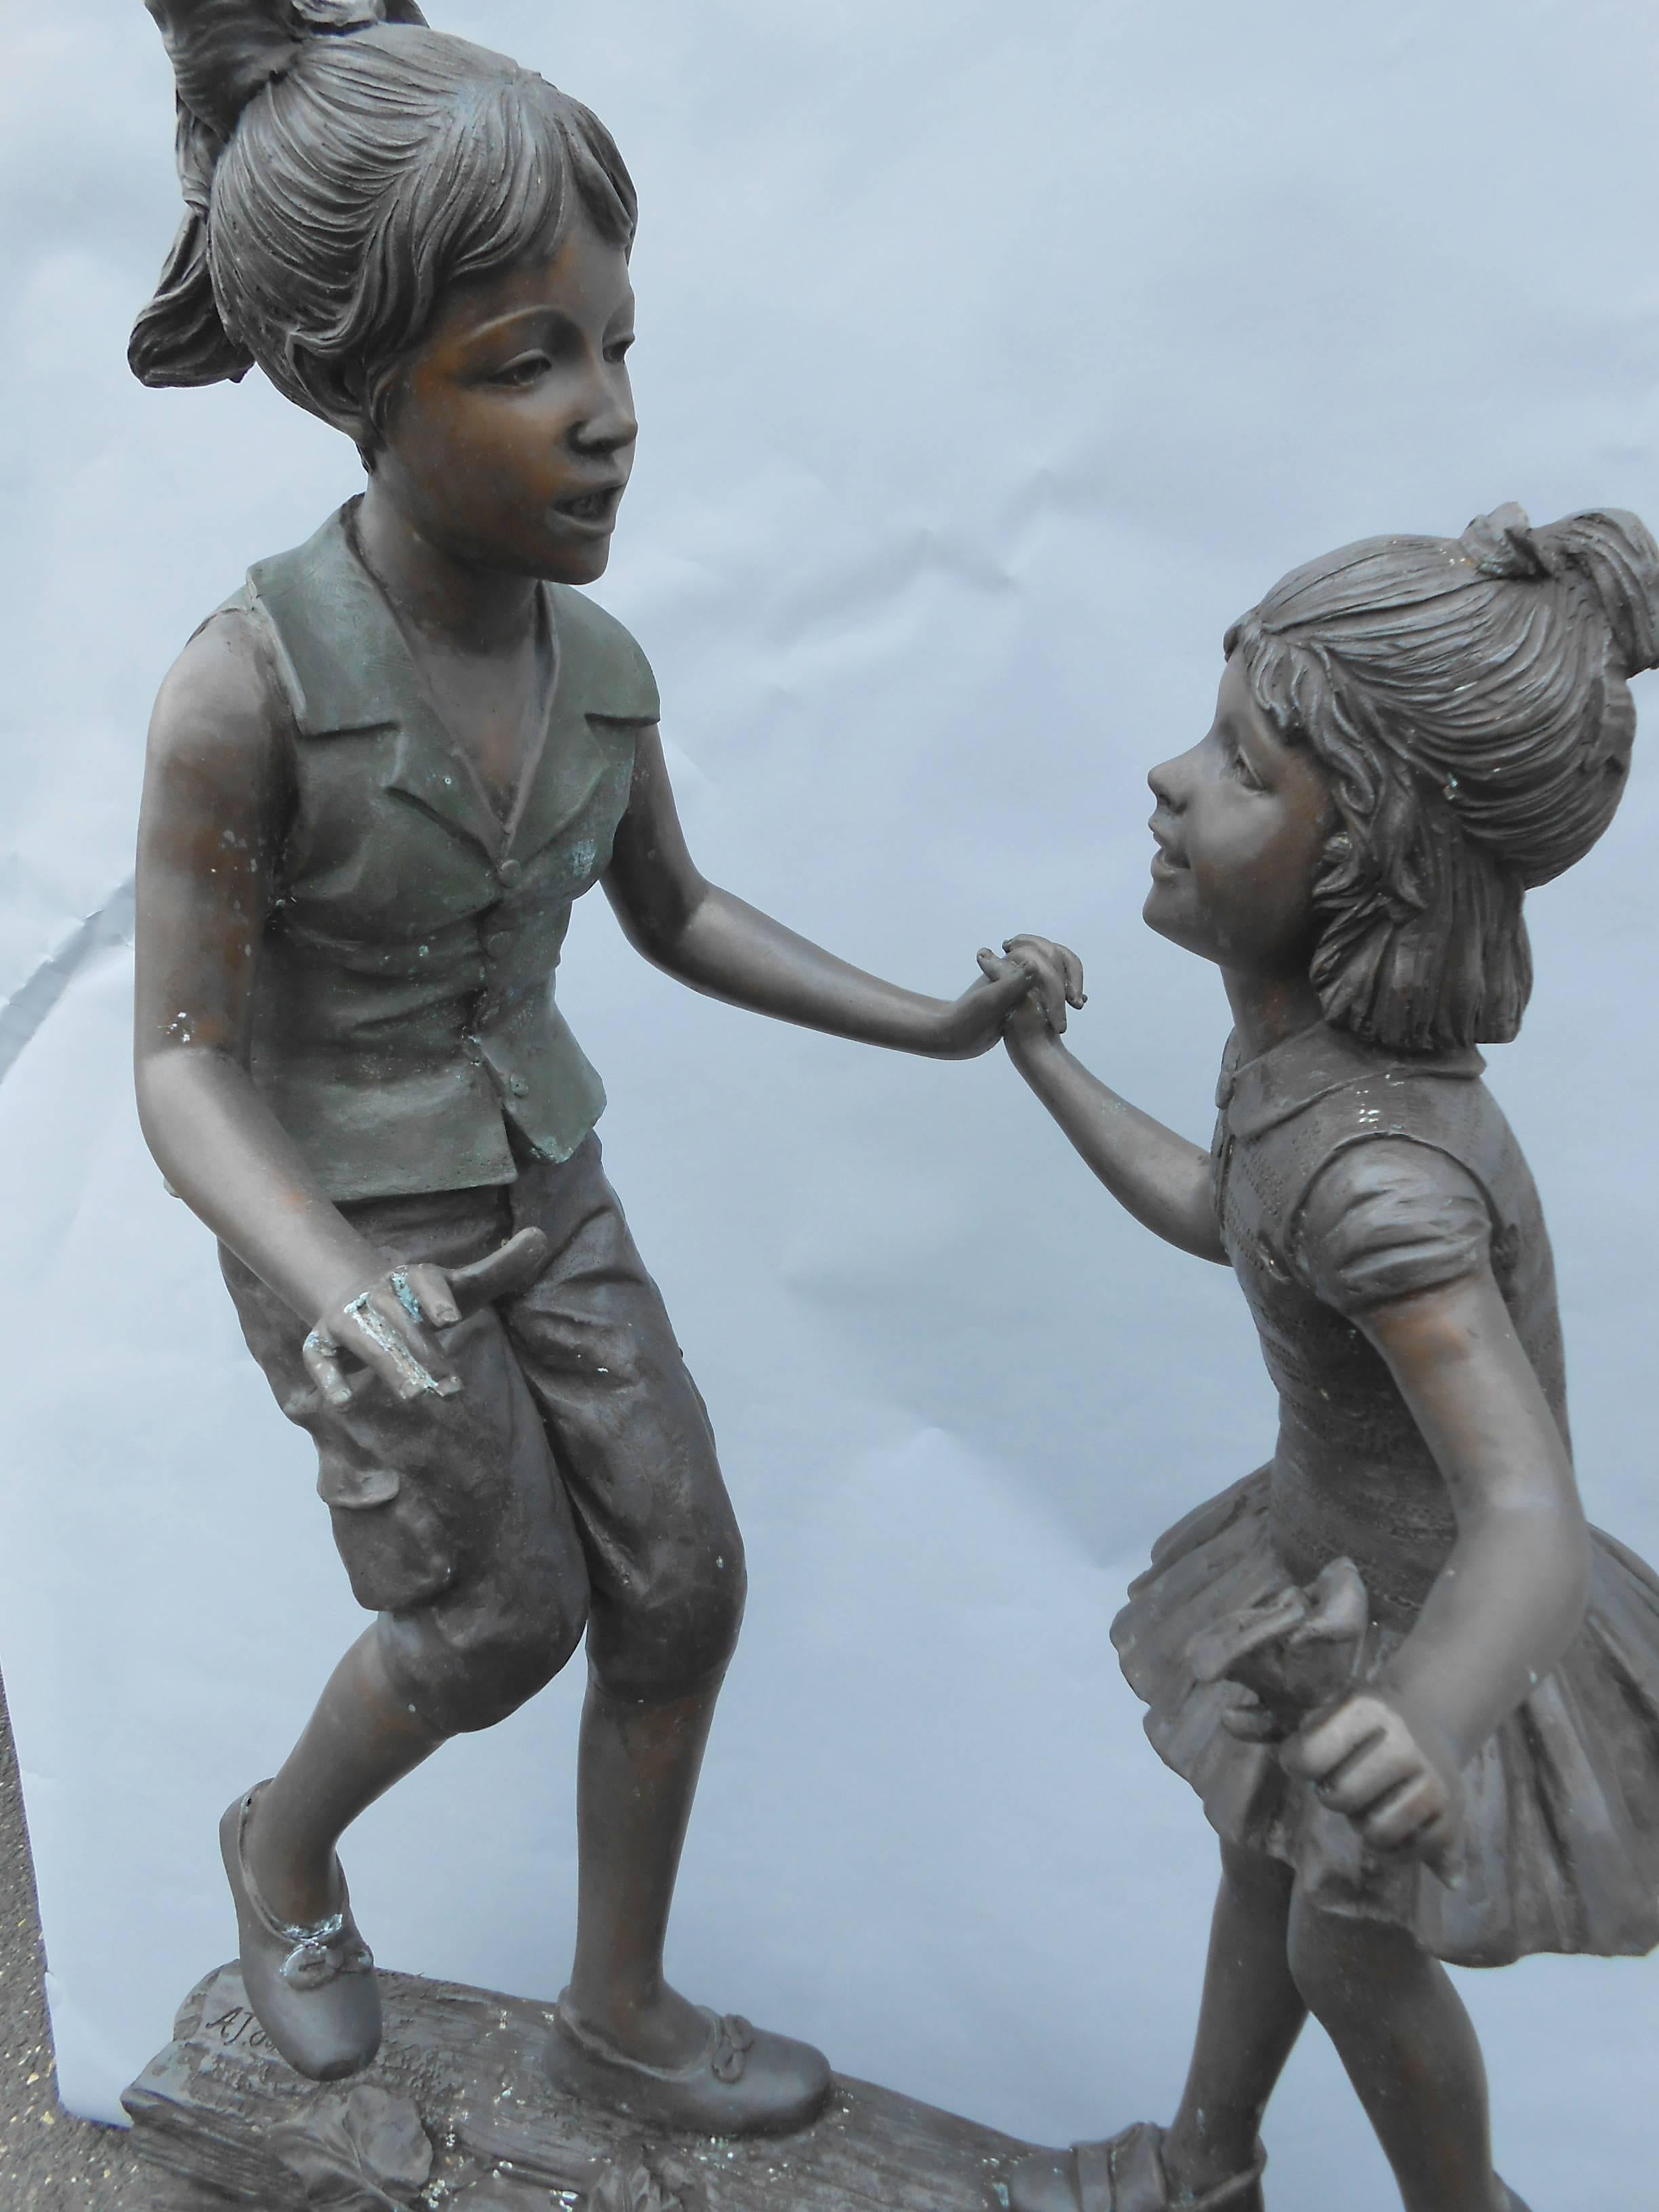 Stunning bronze statue features three children playing on a log with their puppy. This large sculpted statue shows incredible detail and creates a wonderful scene of youth. Wonderful design shows quality craftsmanship by AJ John. Impressive piece